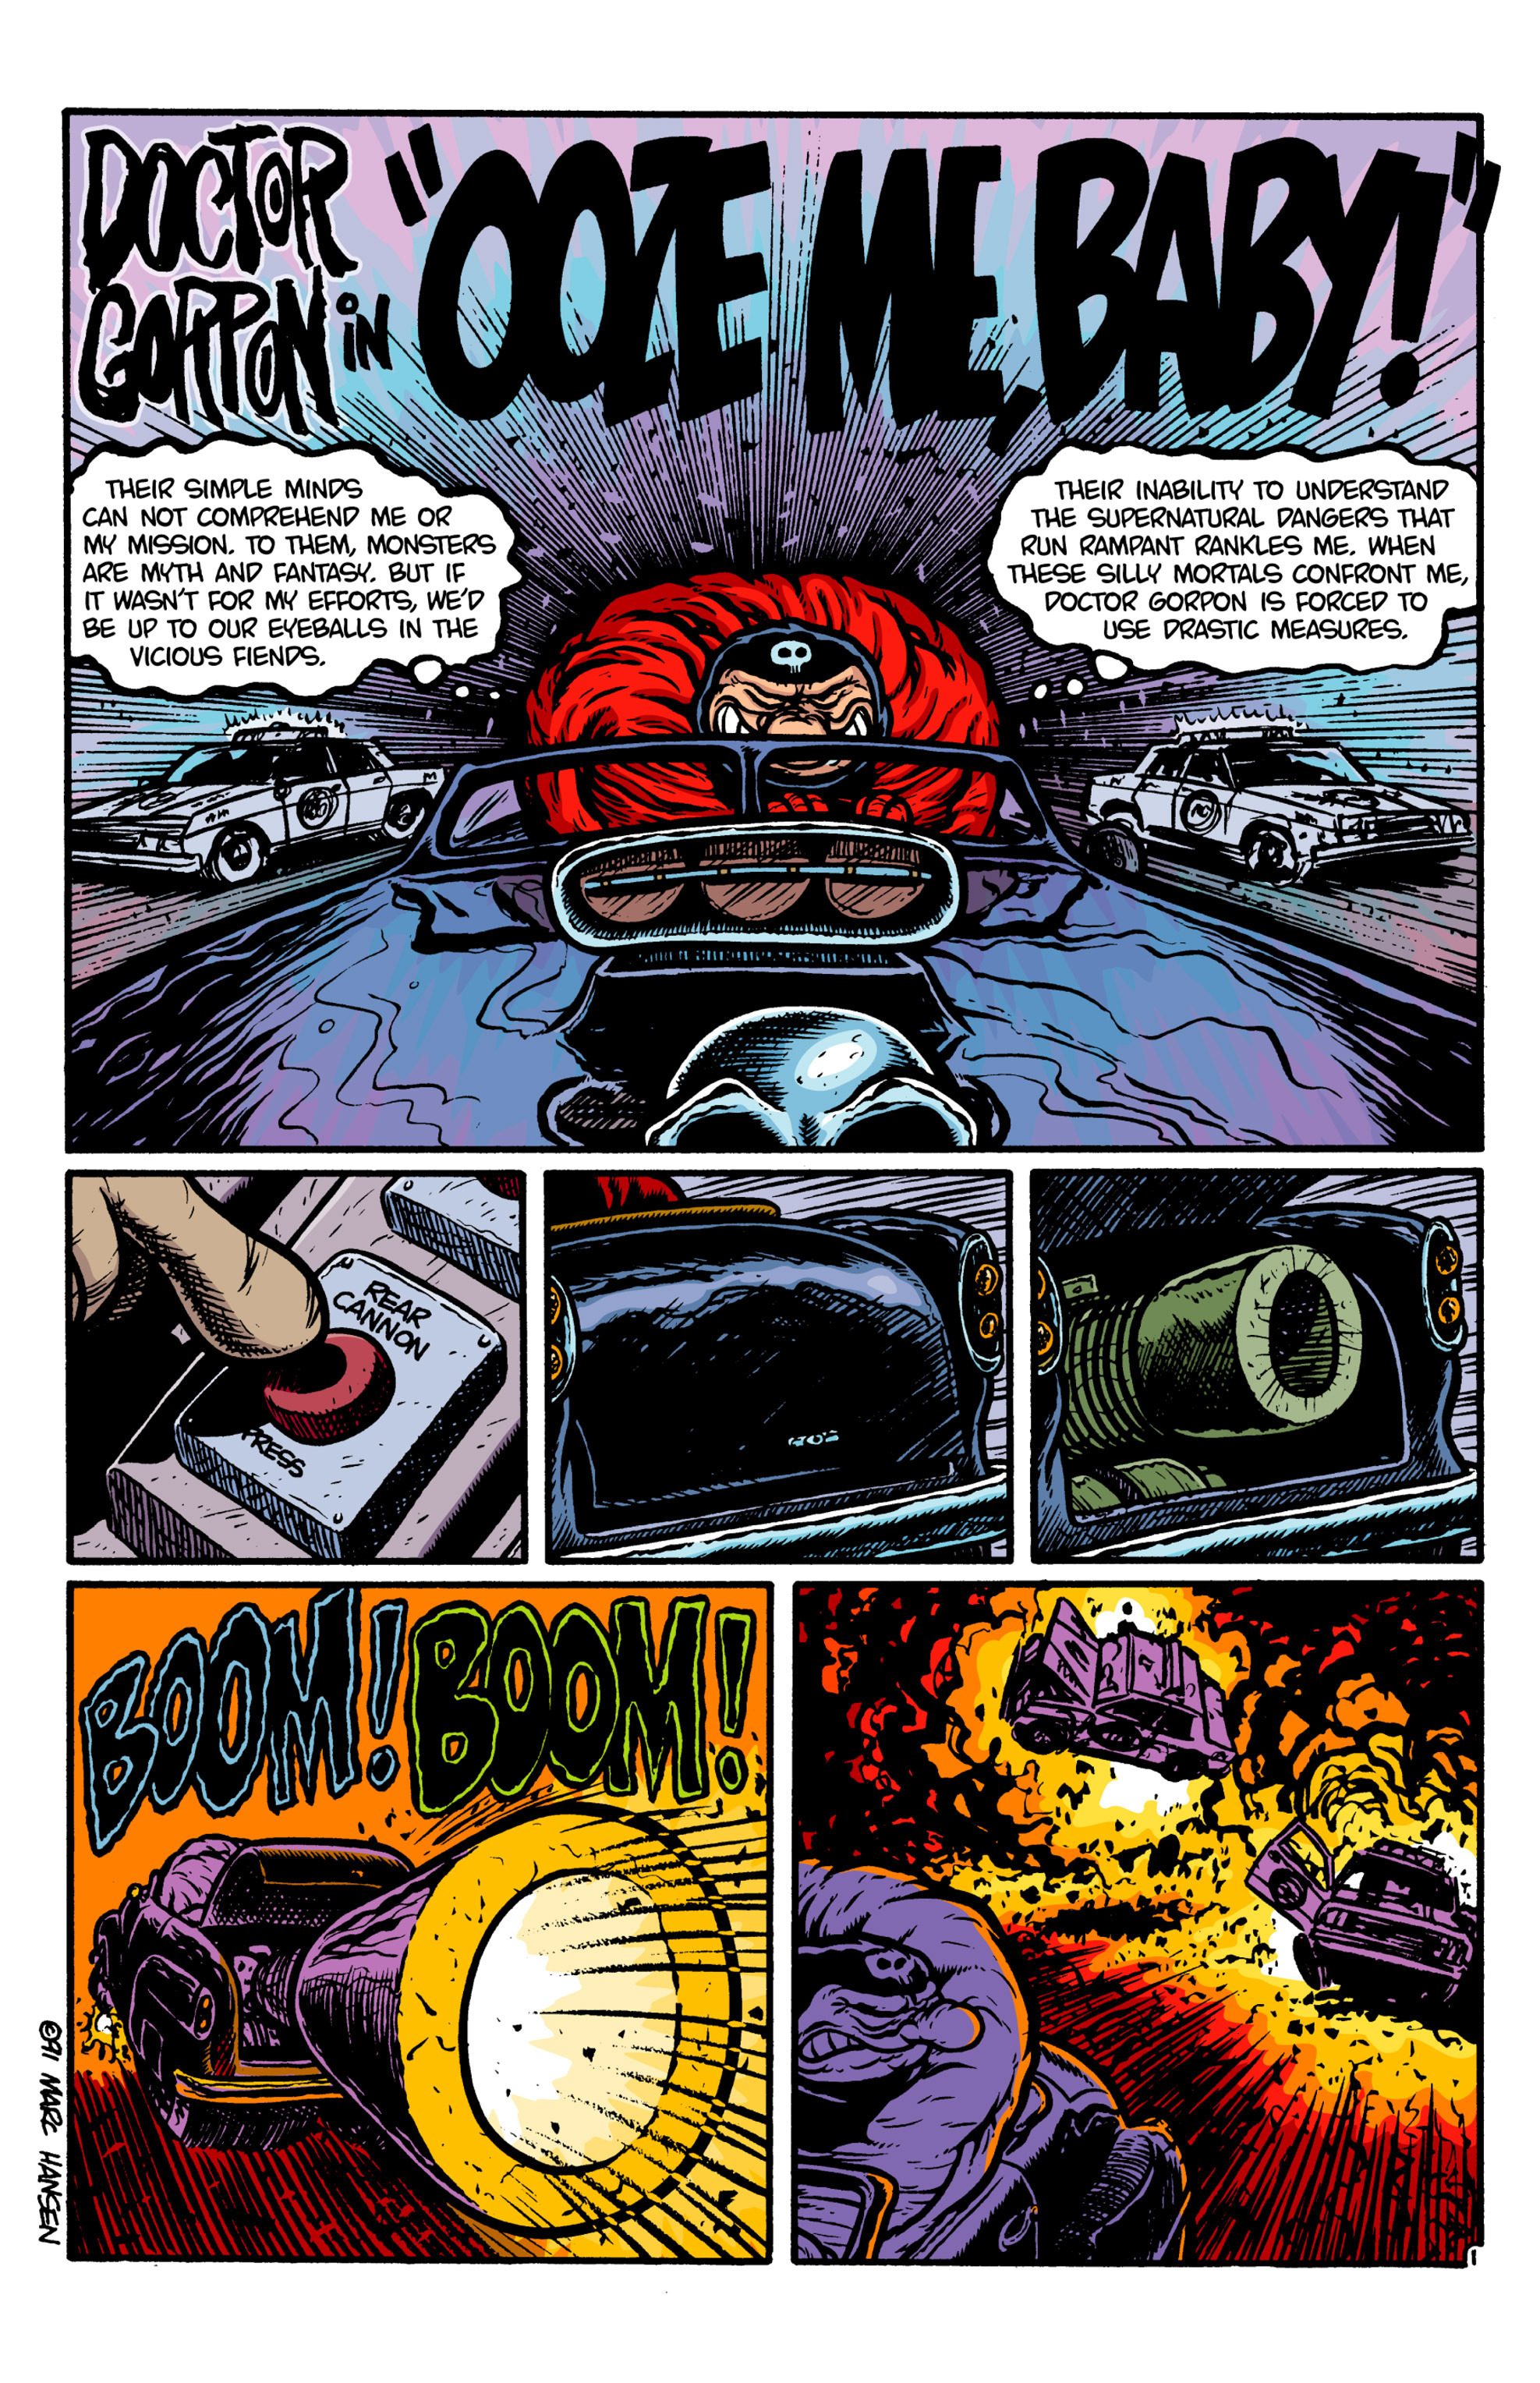 Read online Doctor Gorpon comic -  Issue #2 - 3